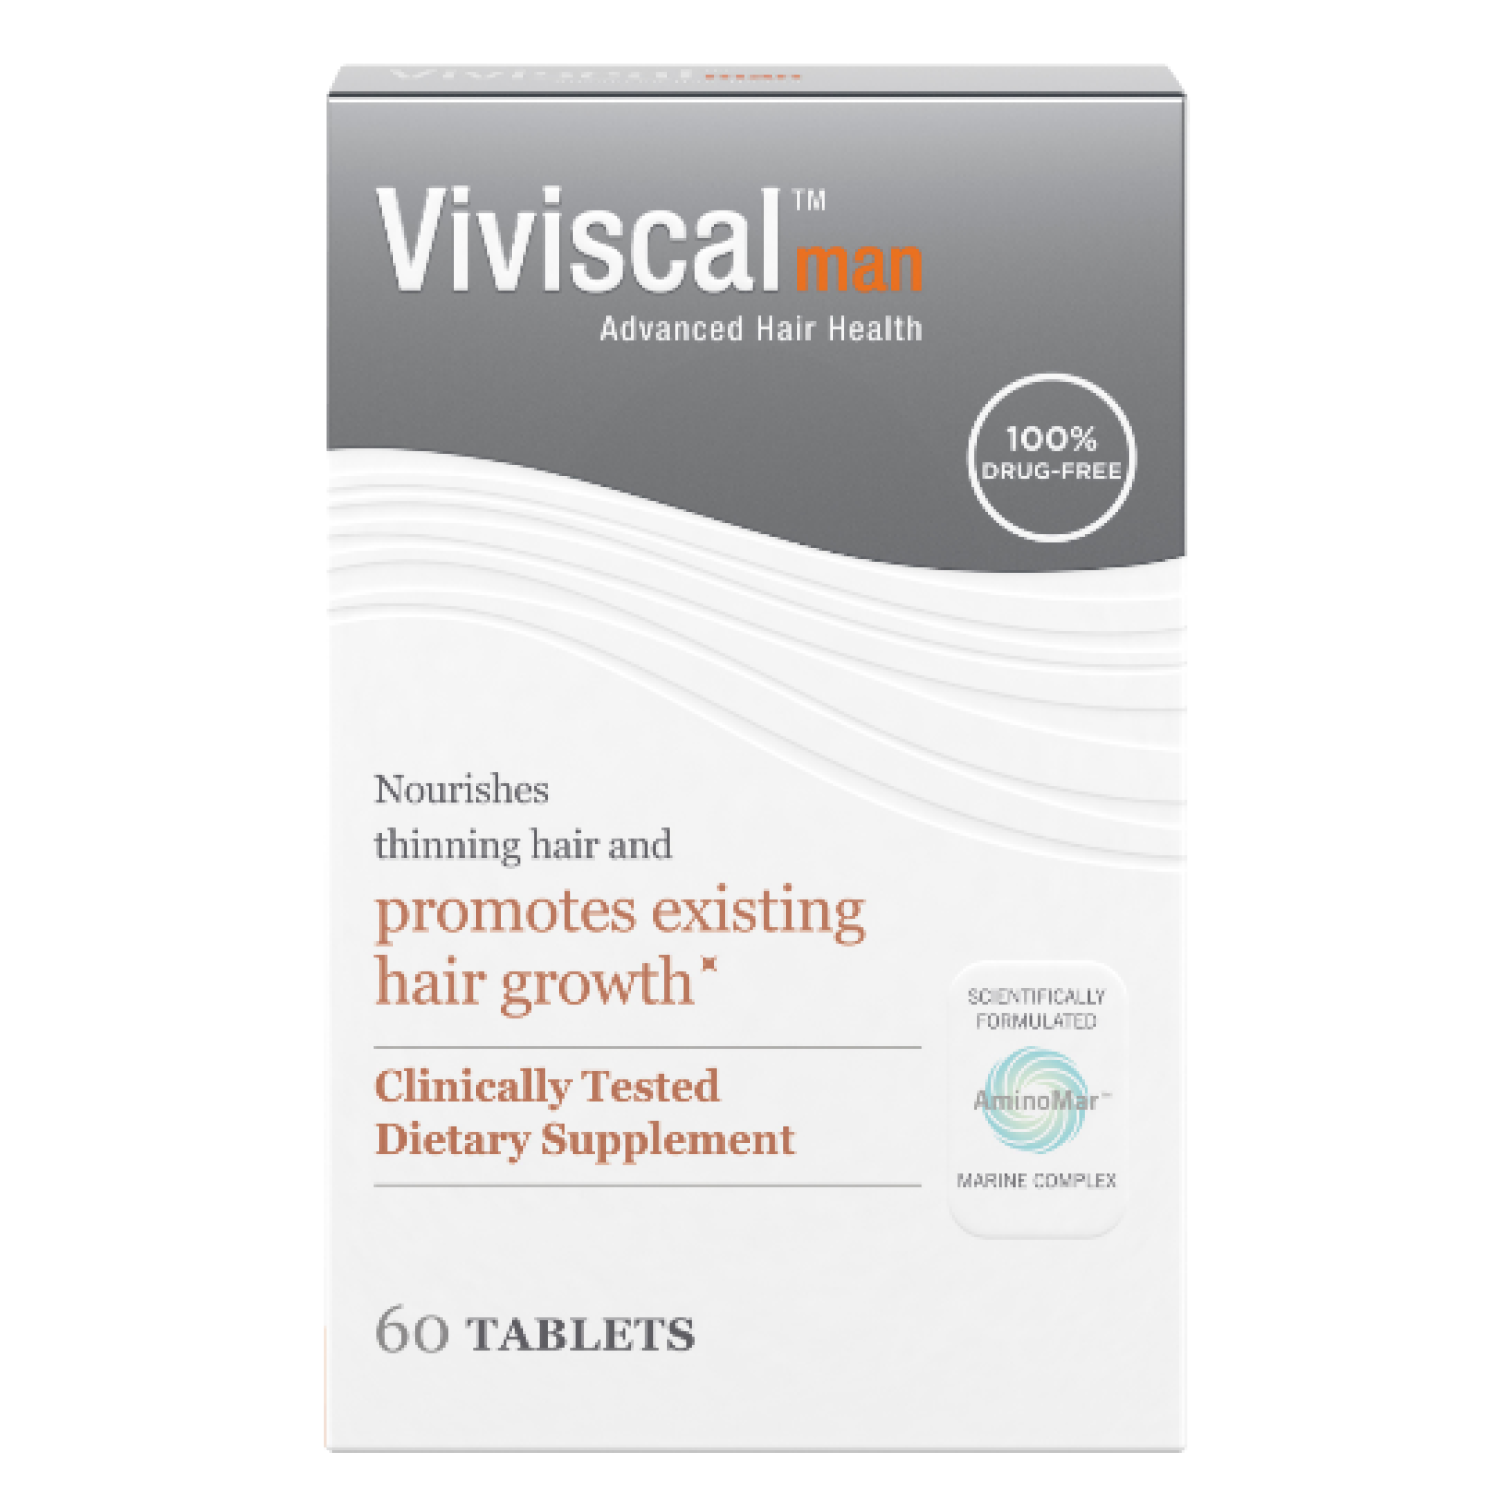 Viviscal Hair Growth Vitamins and Hair Care Products for Men and Women